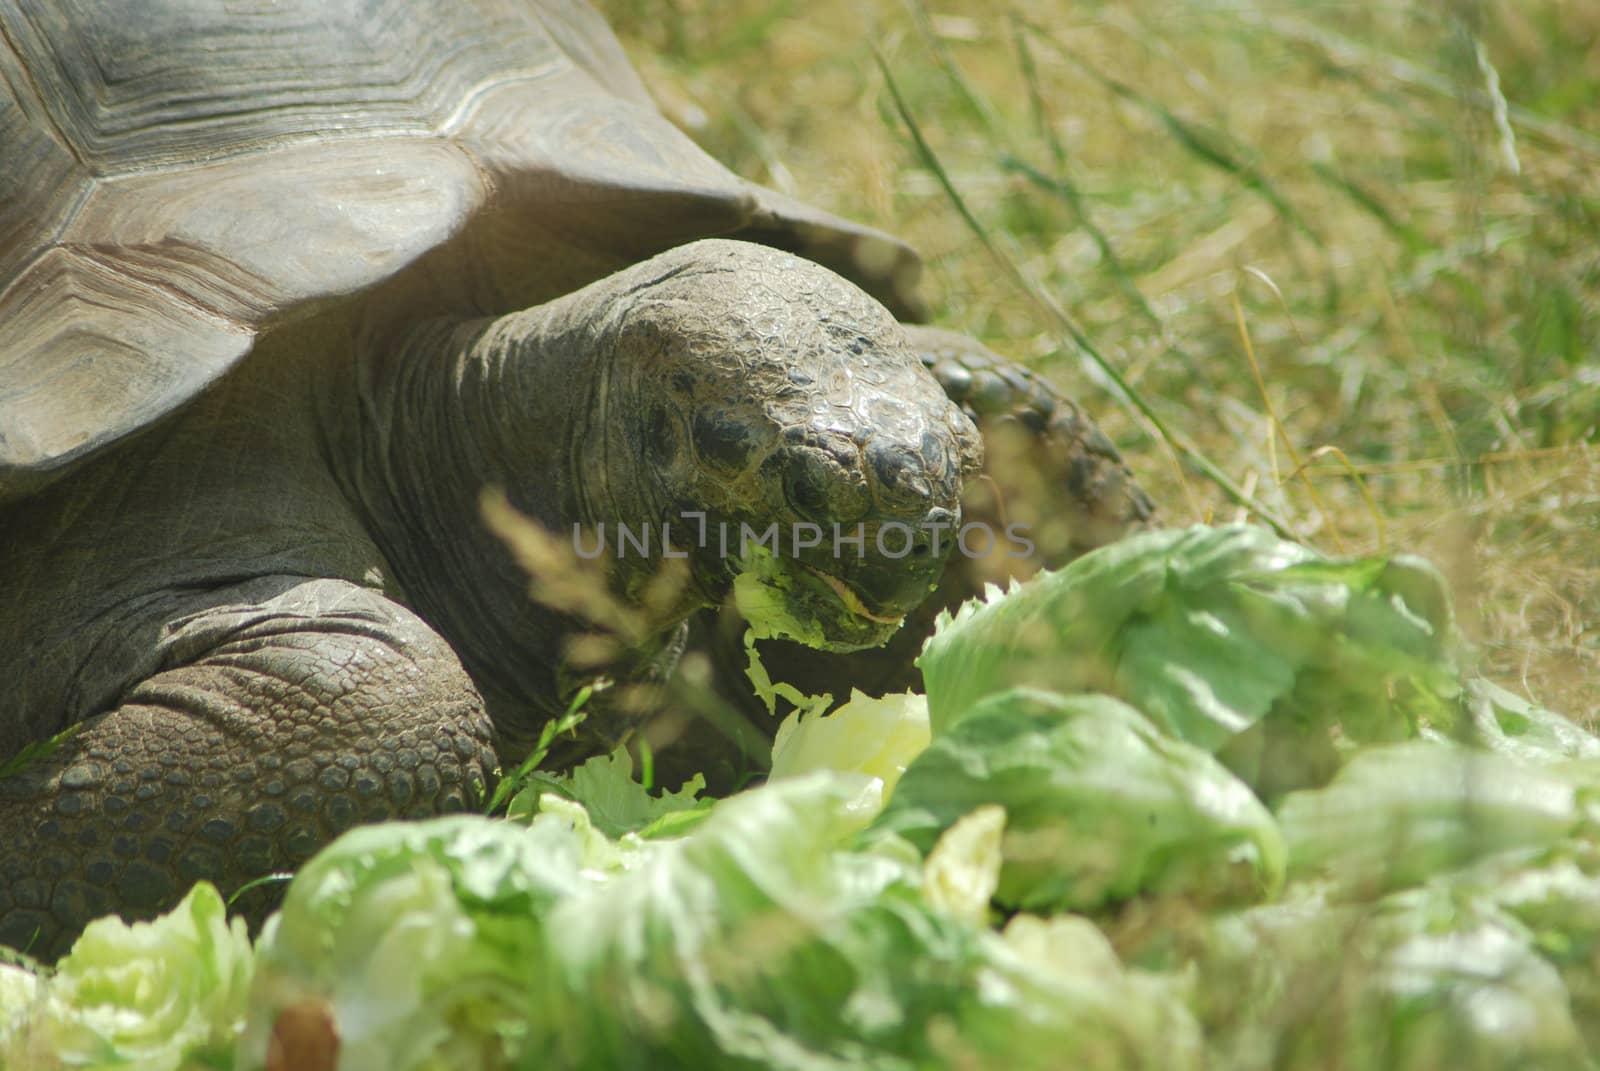 Big Seychelles turtle eating, Giant tortoise close up by svtrotof